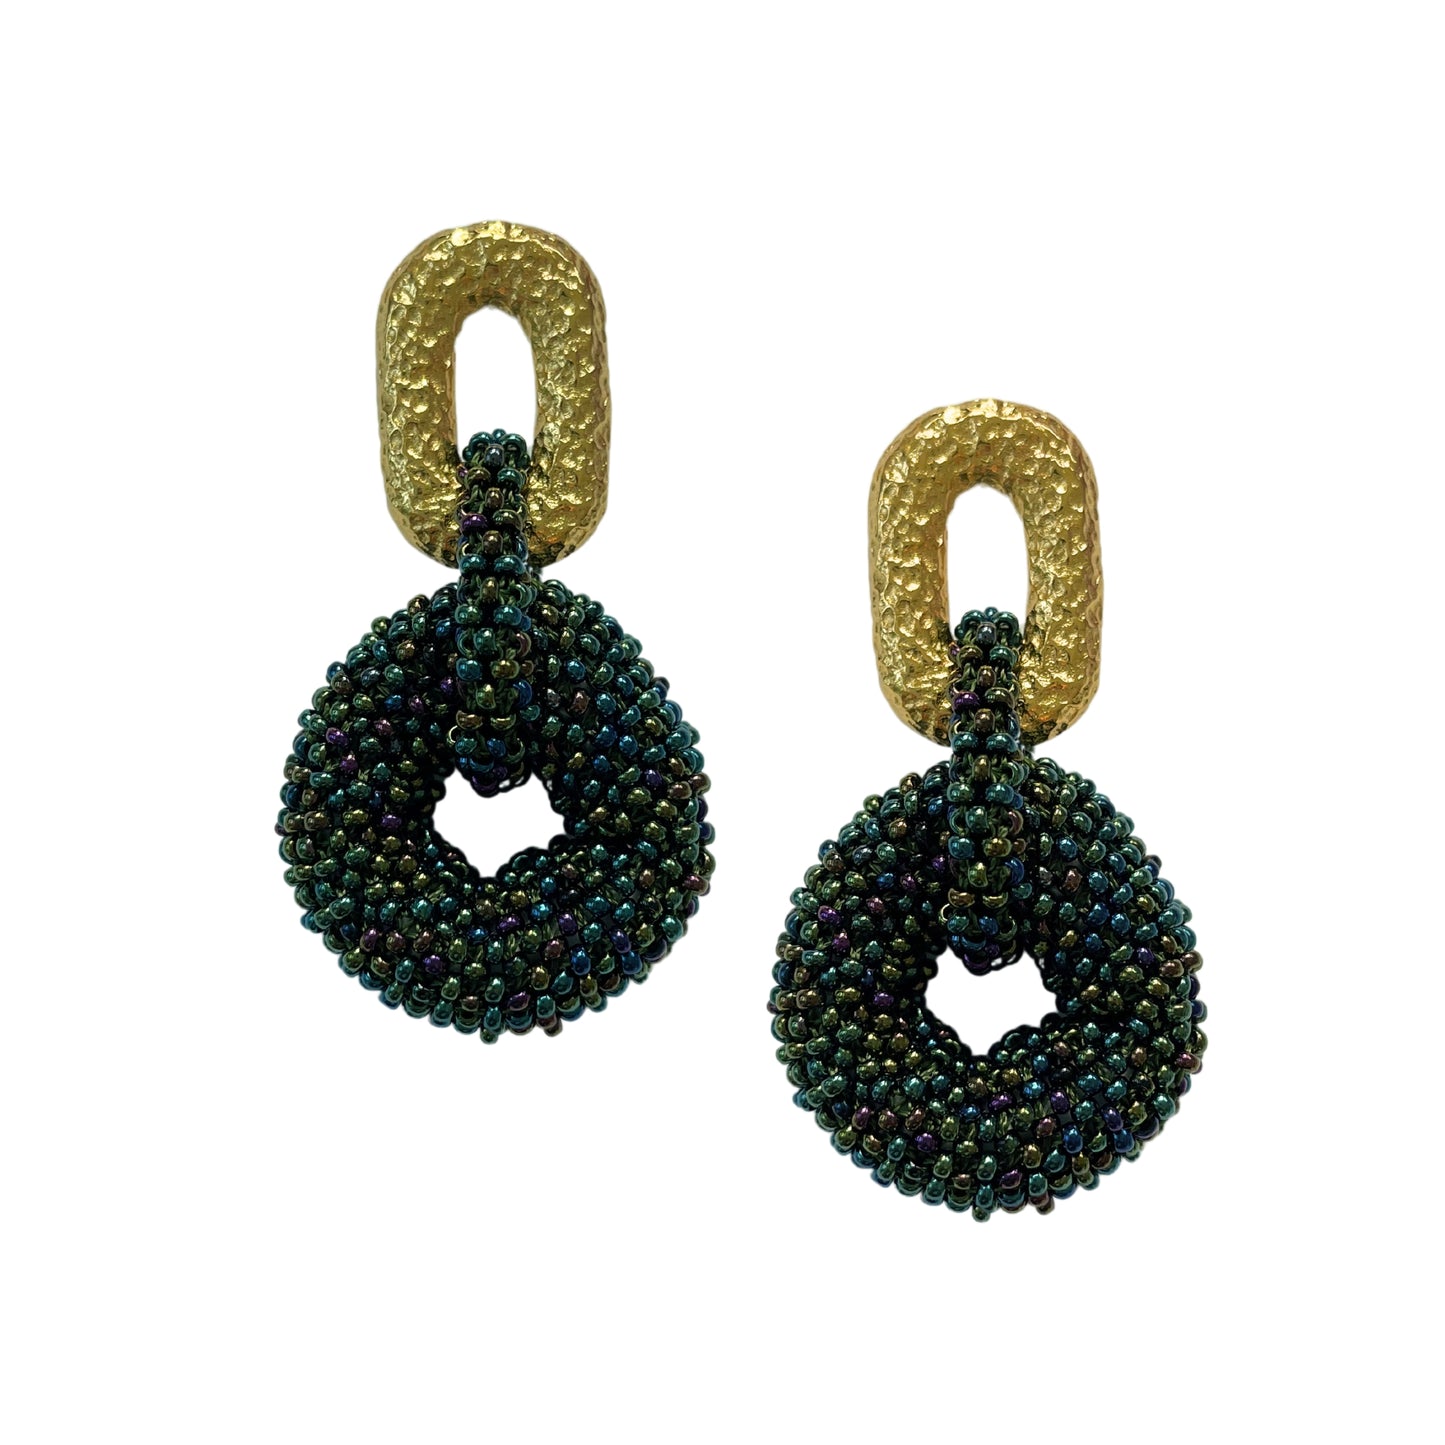 Linked Donuts Earrings Olive Green (Gold)